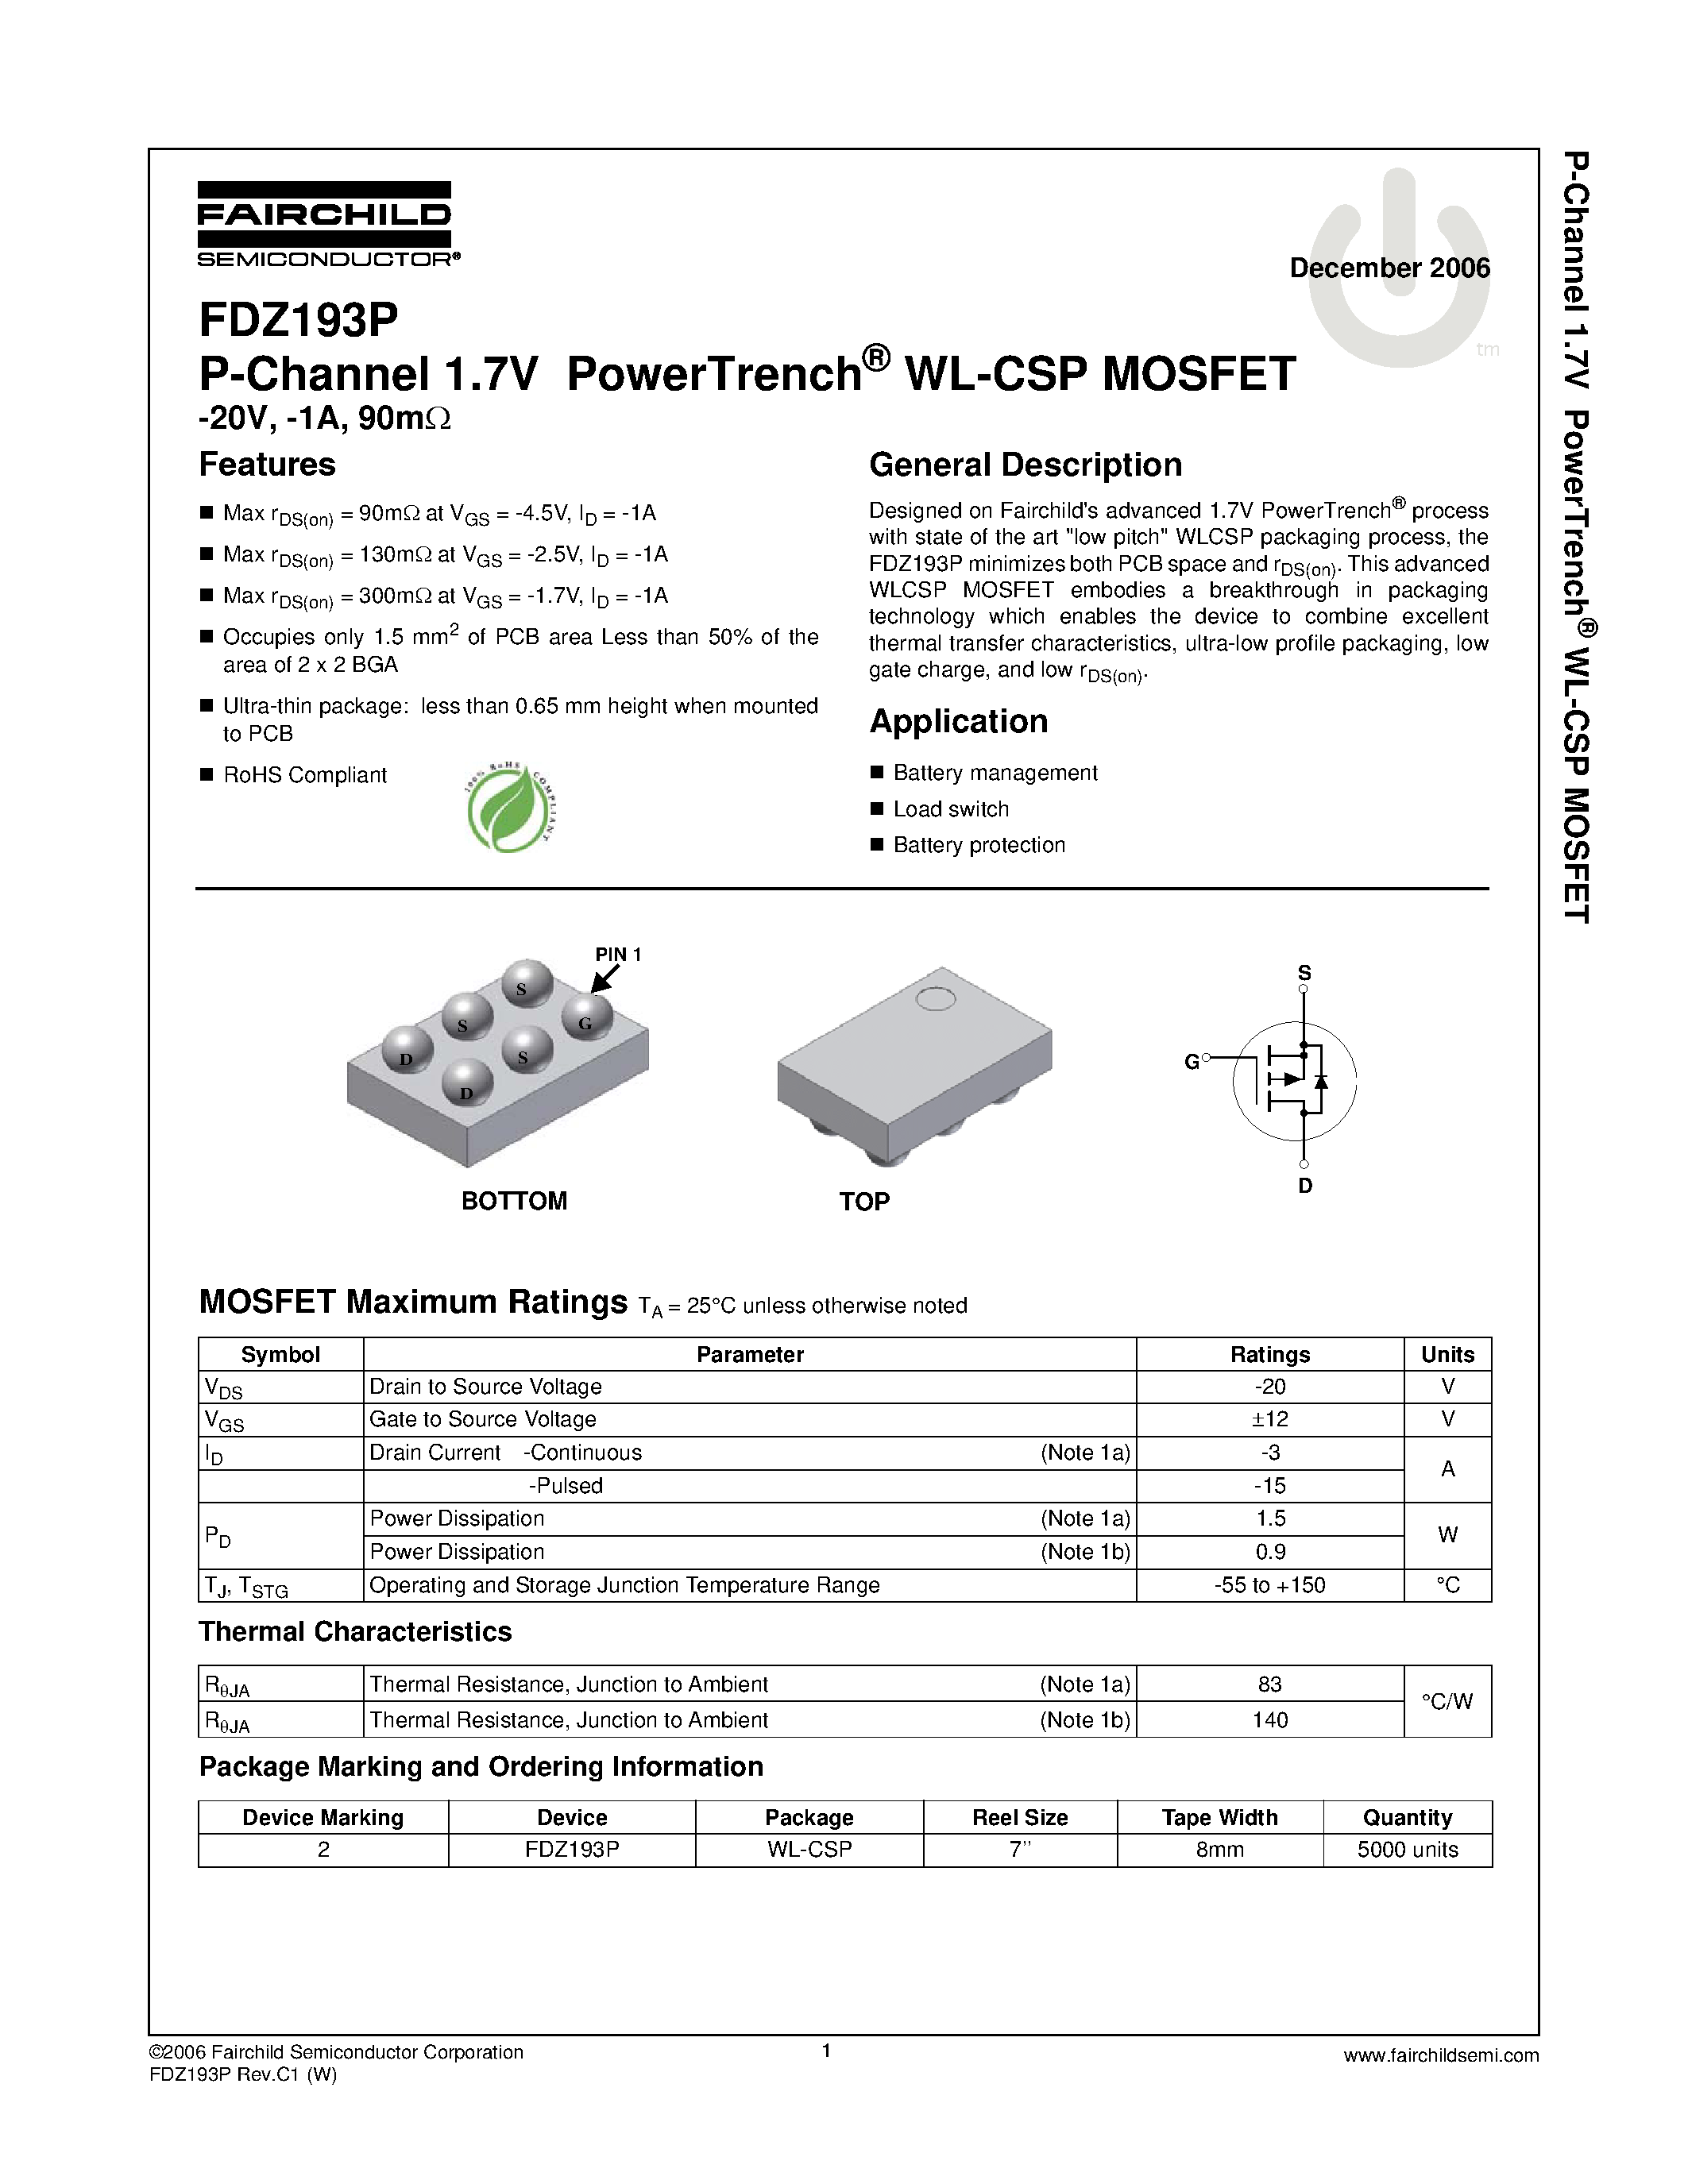 Datasheet FDZ193P - P-Channel 1.7V PowerTrench WL-CSP MOSFET page 1